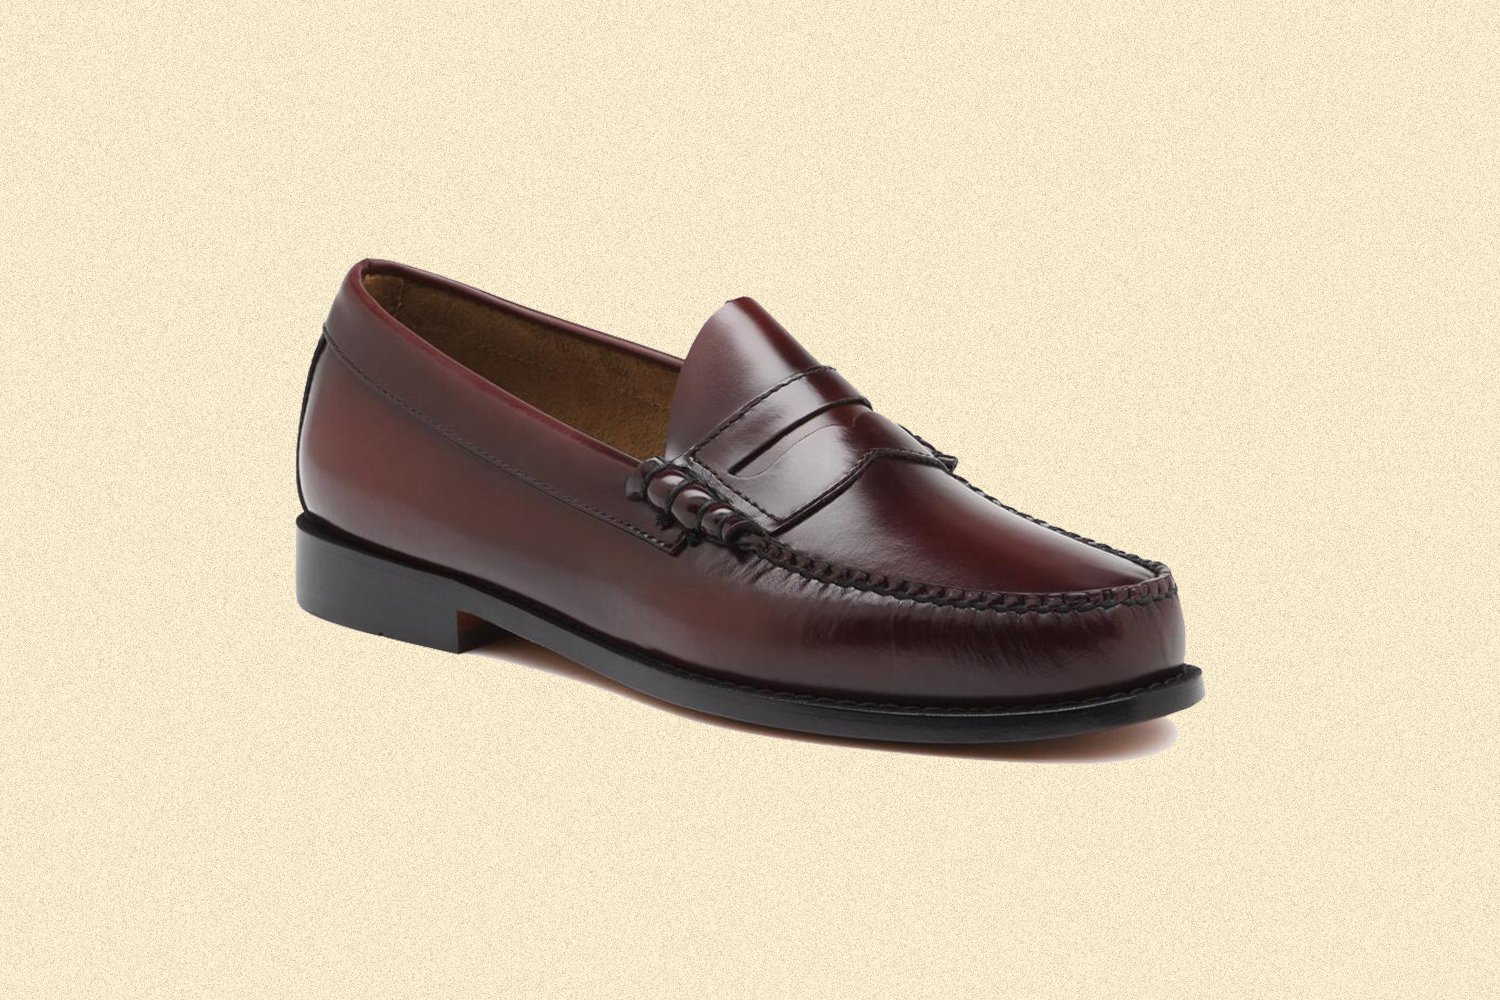 gh bass men's loafers